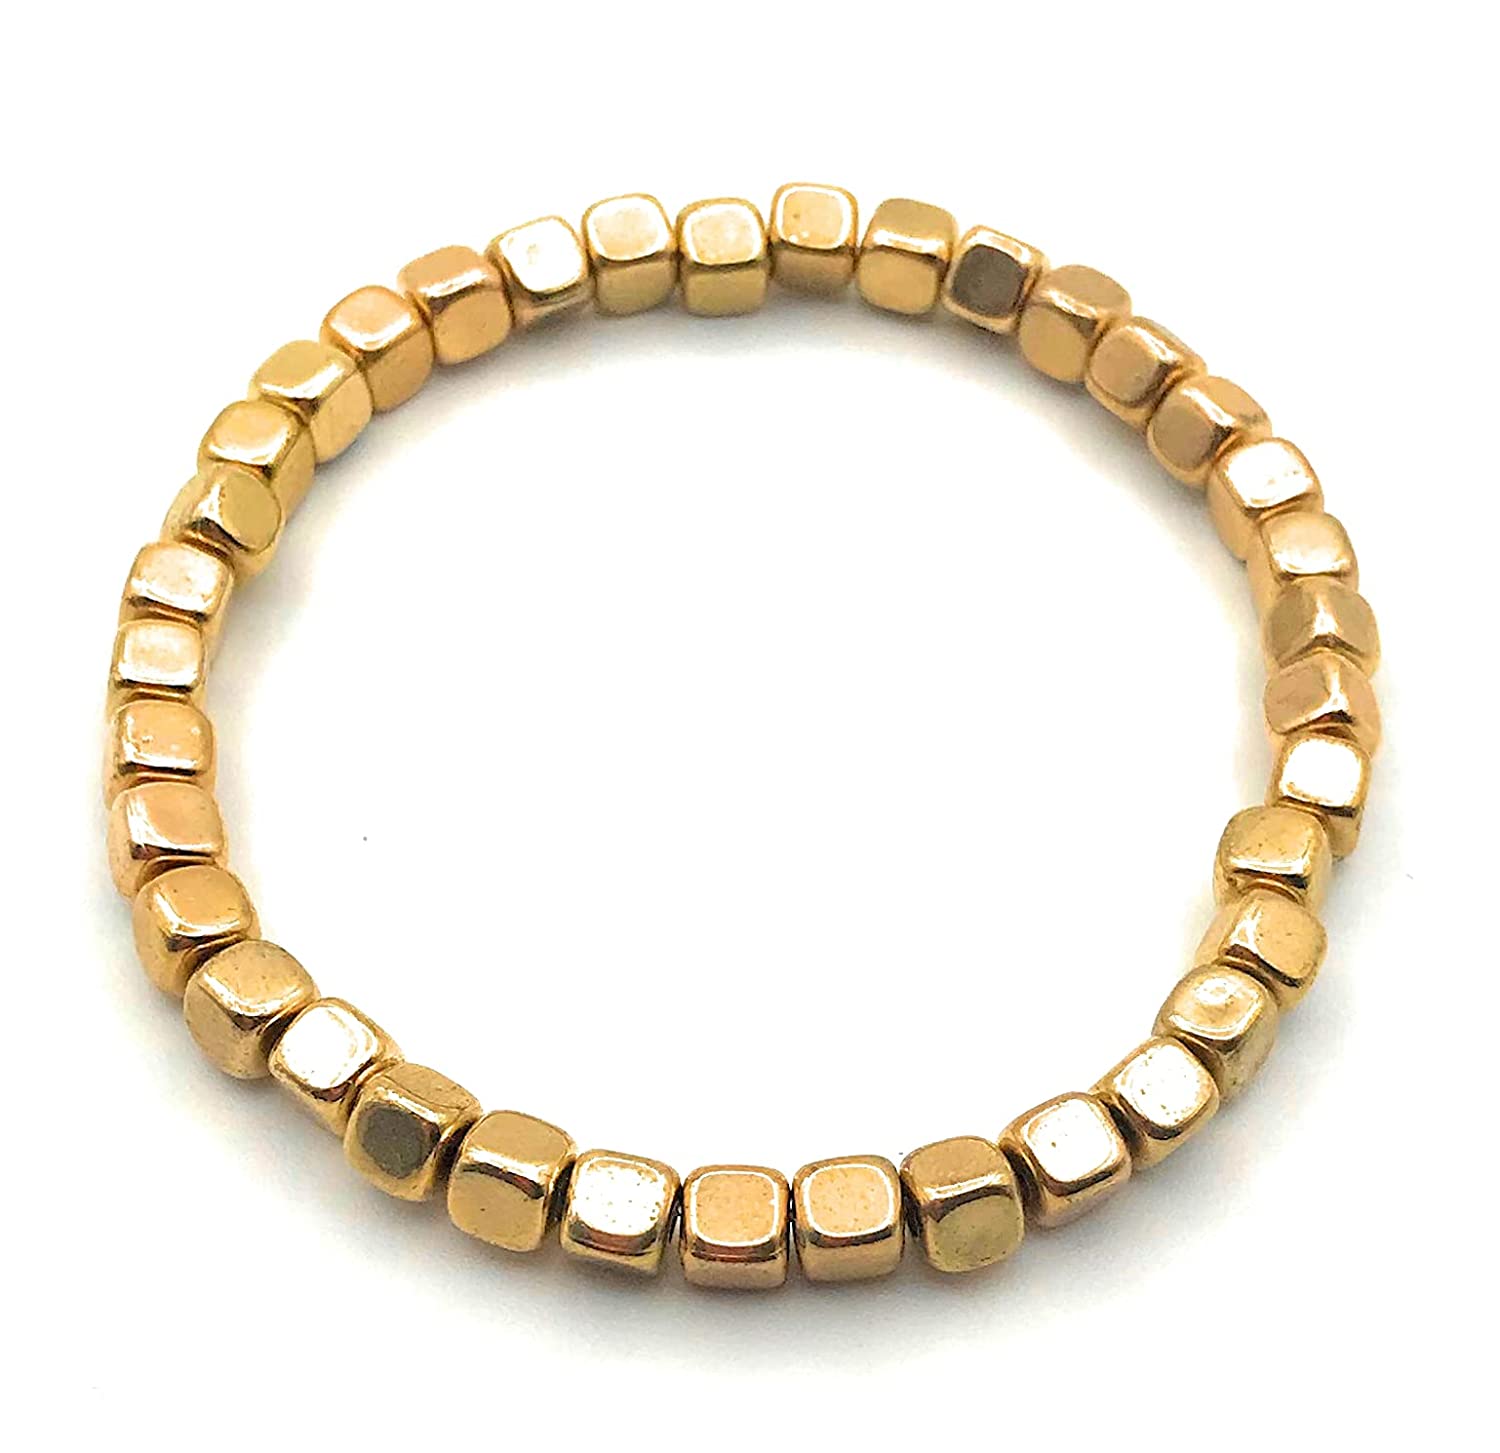 Gold Color Wooden Stretch Bracelet from Scott D Jewelry Designs